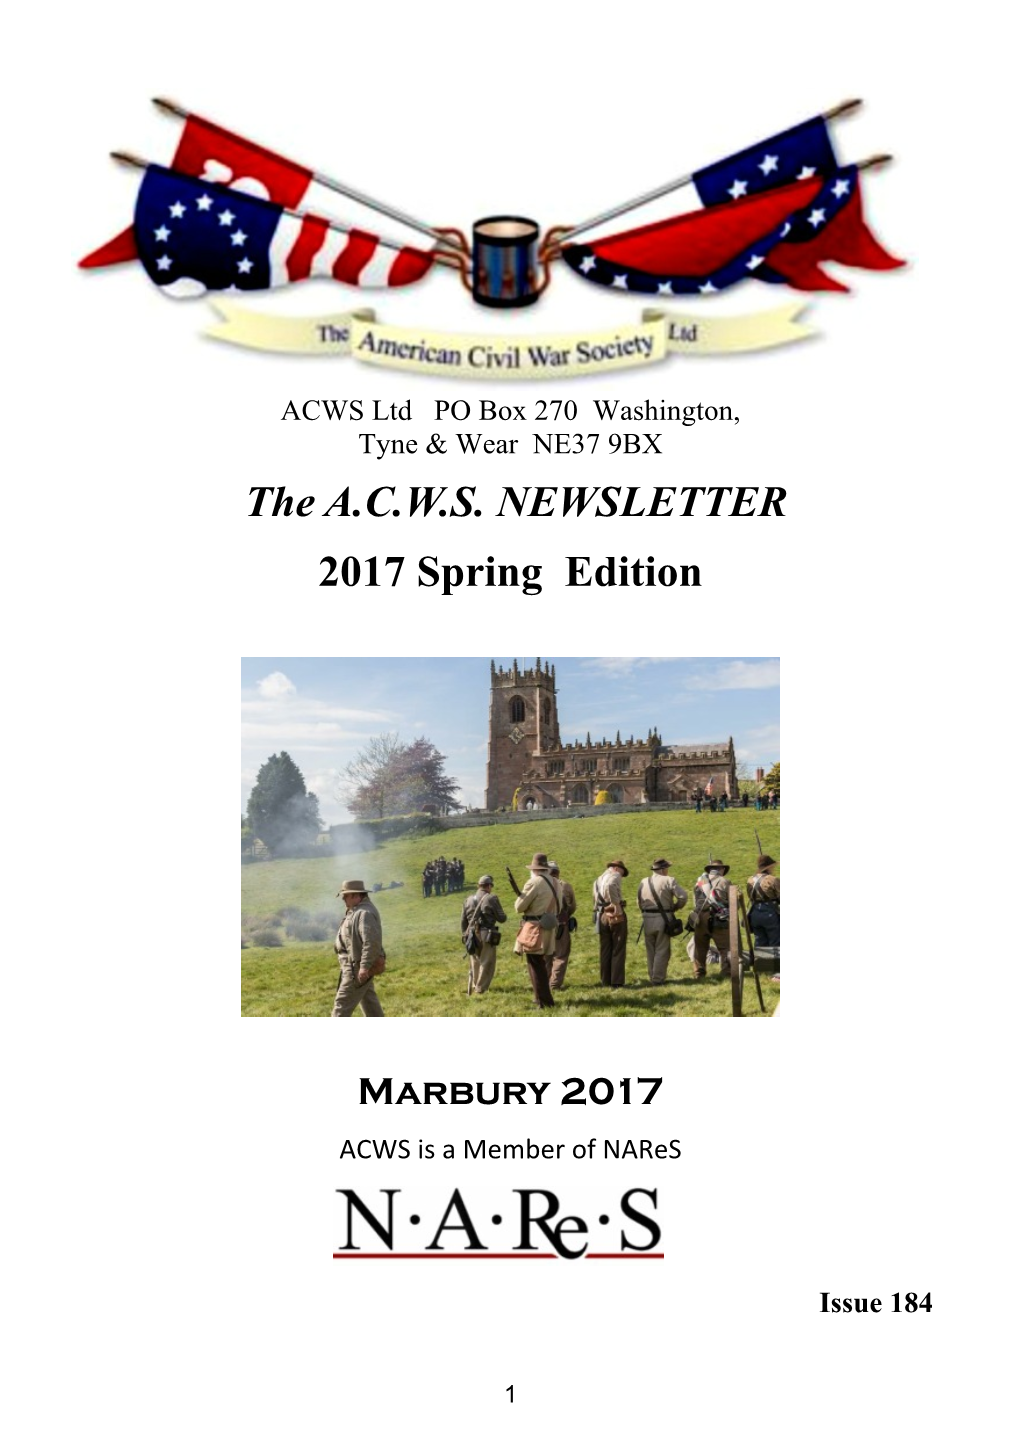 The A.C.W.S. NEWSLETTER 2017 Spring Edition